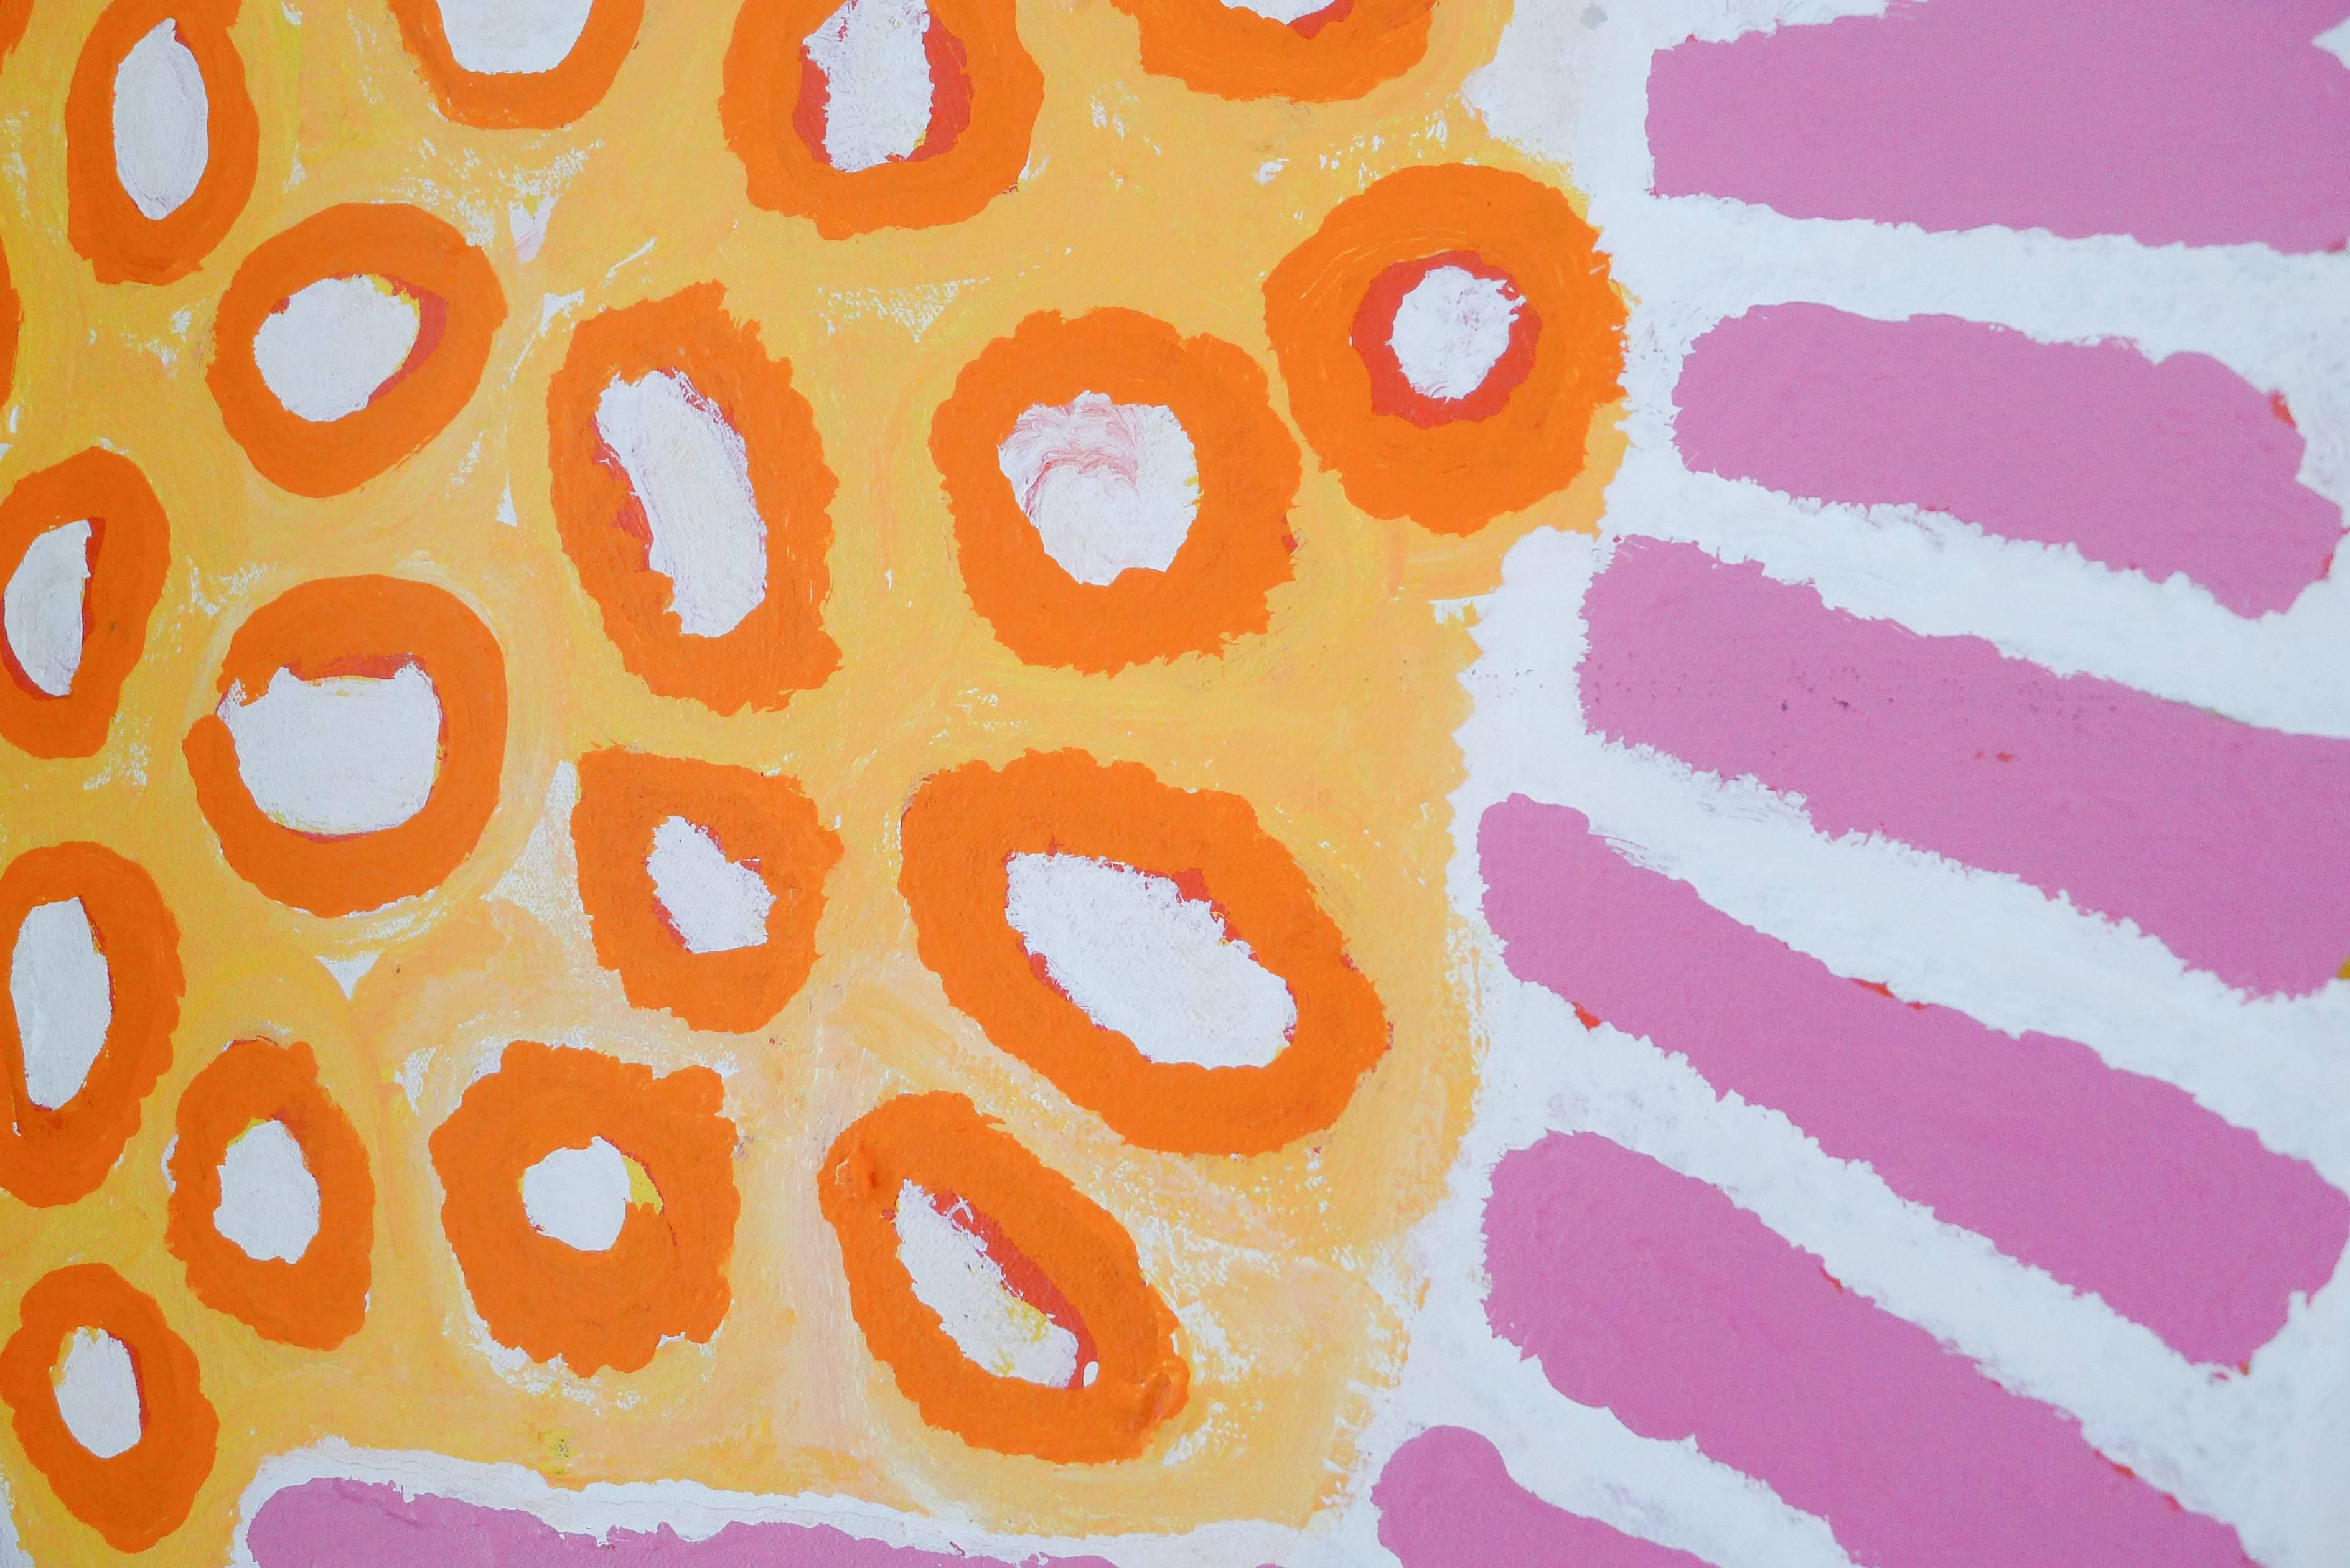 Painted Australian Aboriginal Painting with Yellow, Pink and Orange by Alice Nampitjinpa